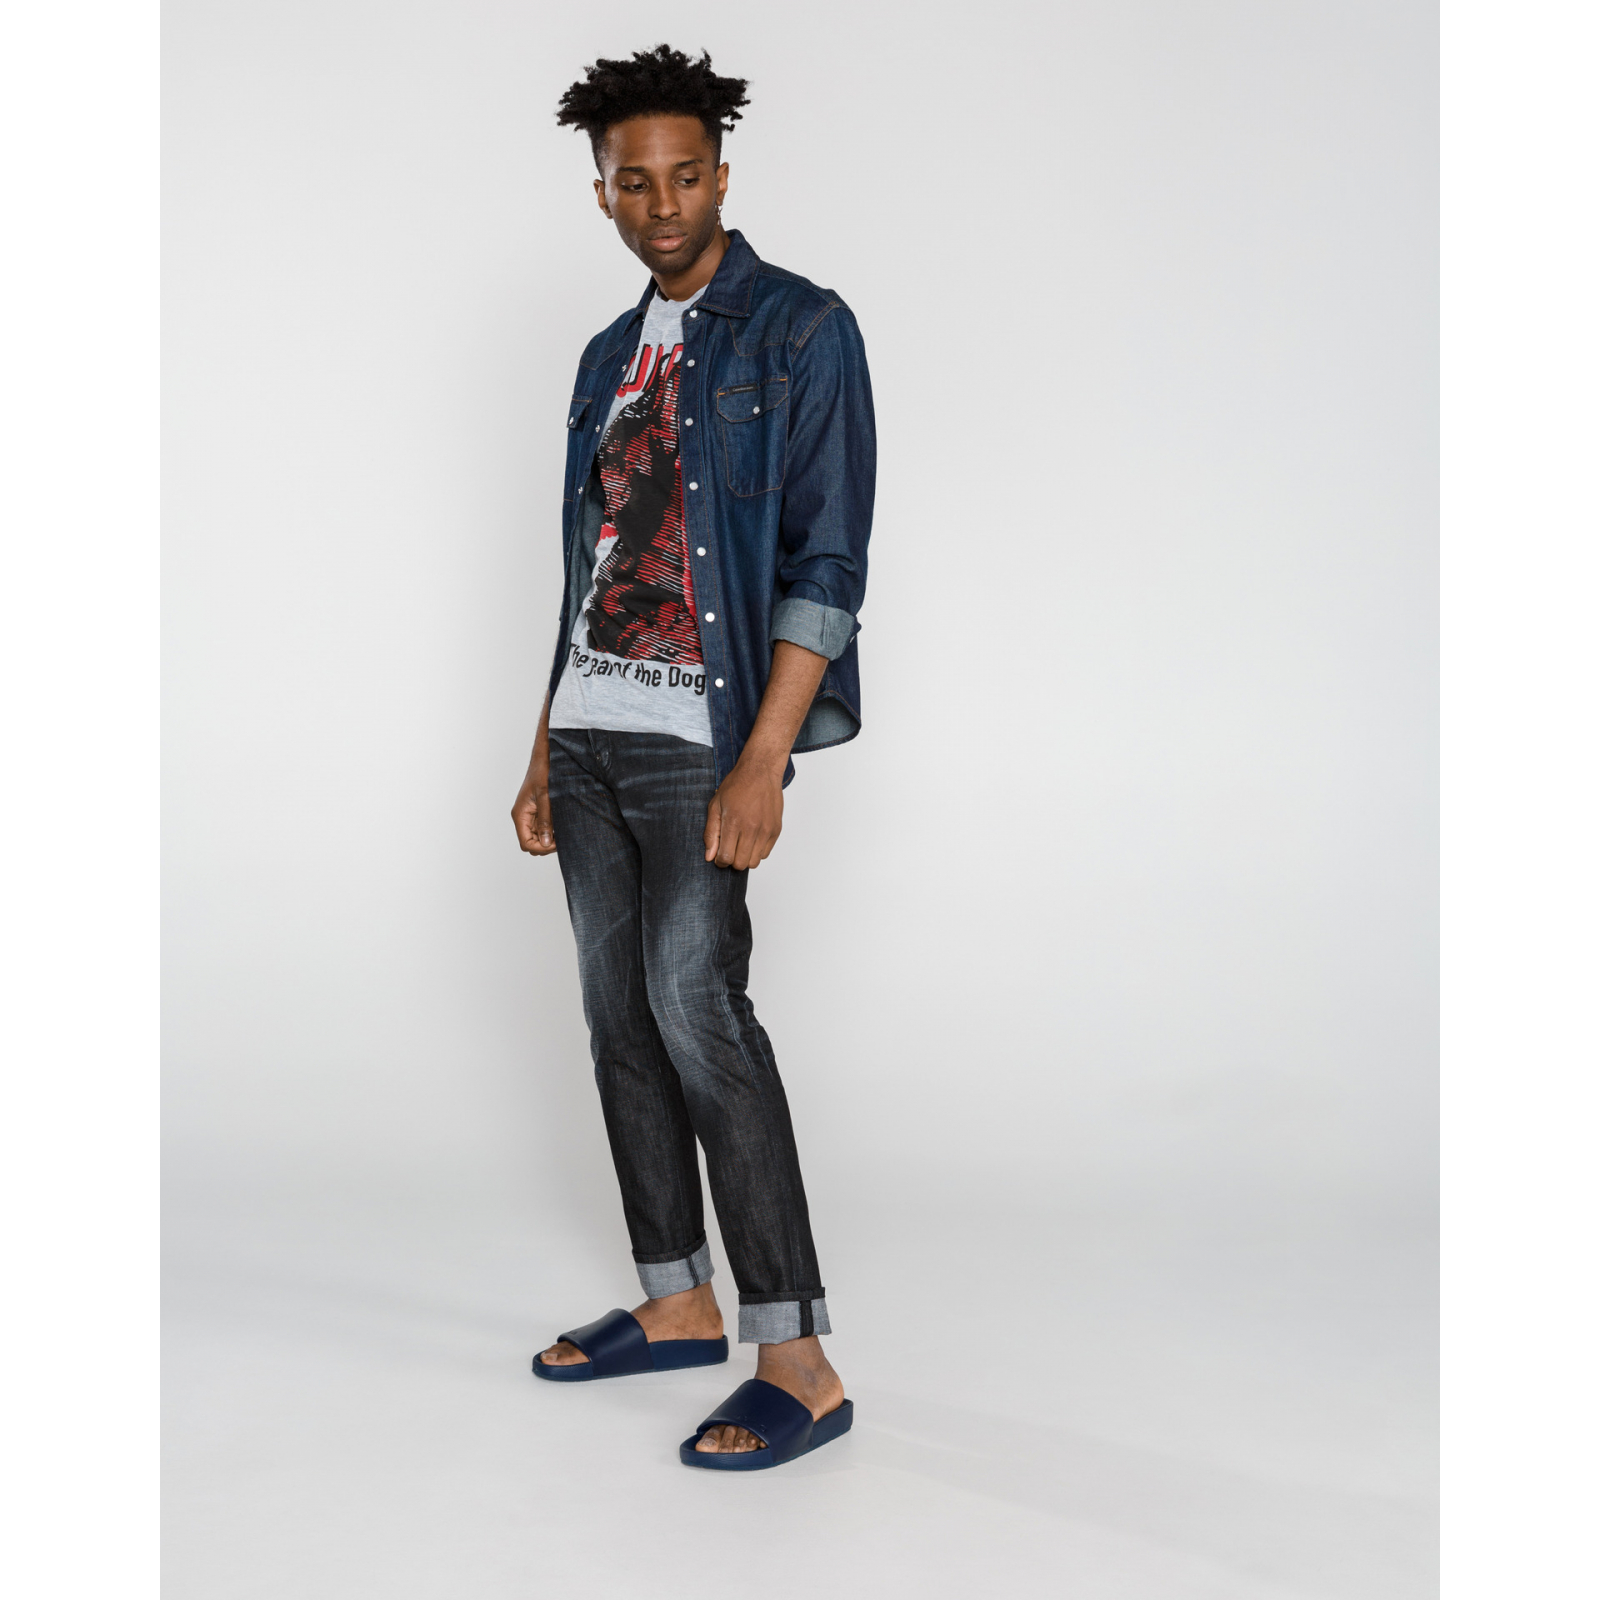 DSQUARED2 Cool Guy Jeans nowe 48 Italy